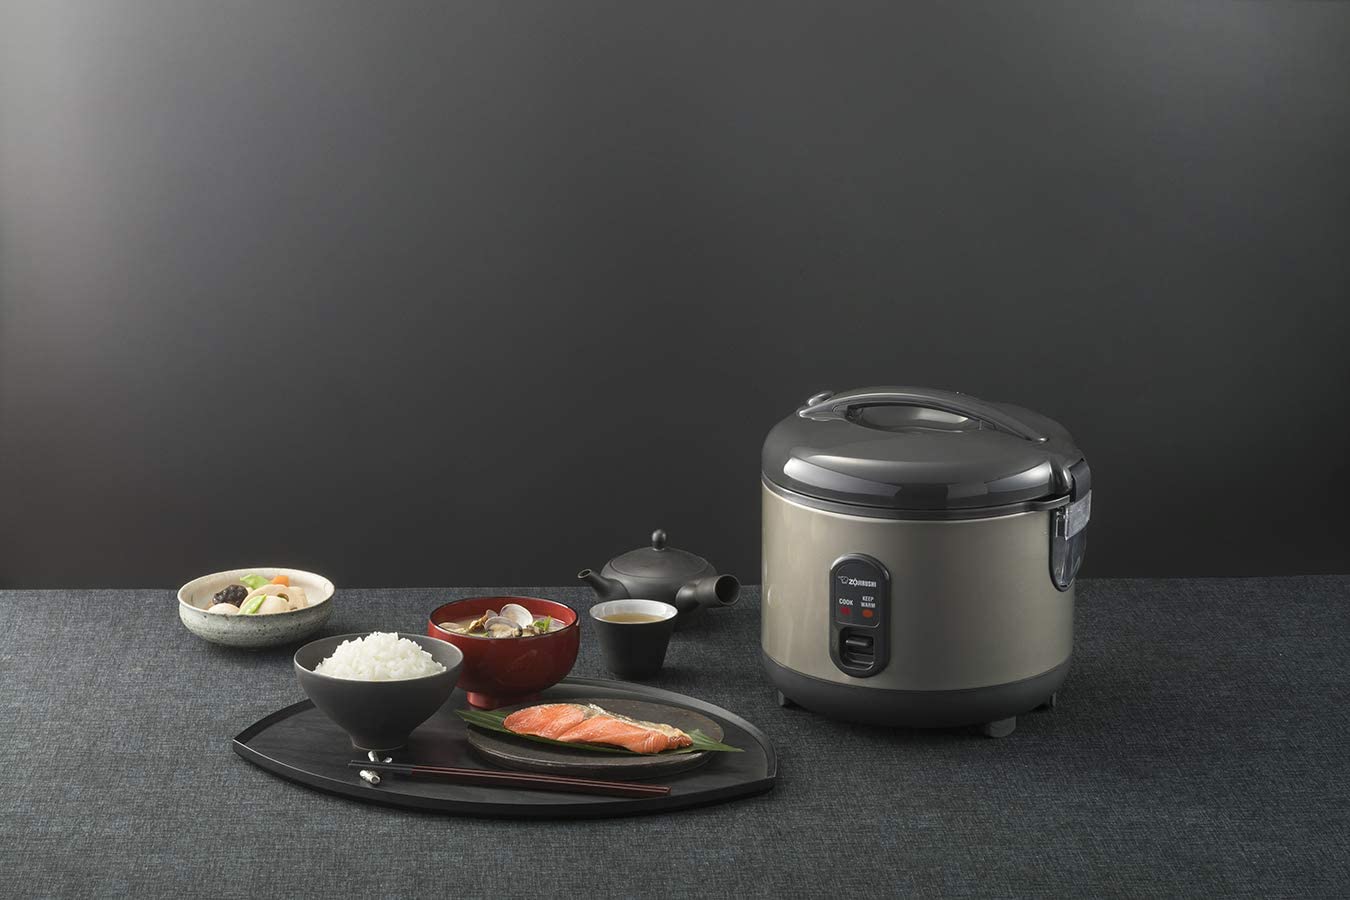 Holstein Housewares 5-Cup Rice Cooker, Black- Convenient and User Friendly  with Warm and Cook Function, Ideal for Rice, Quinoa, Oatmeal, Stews and